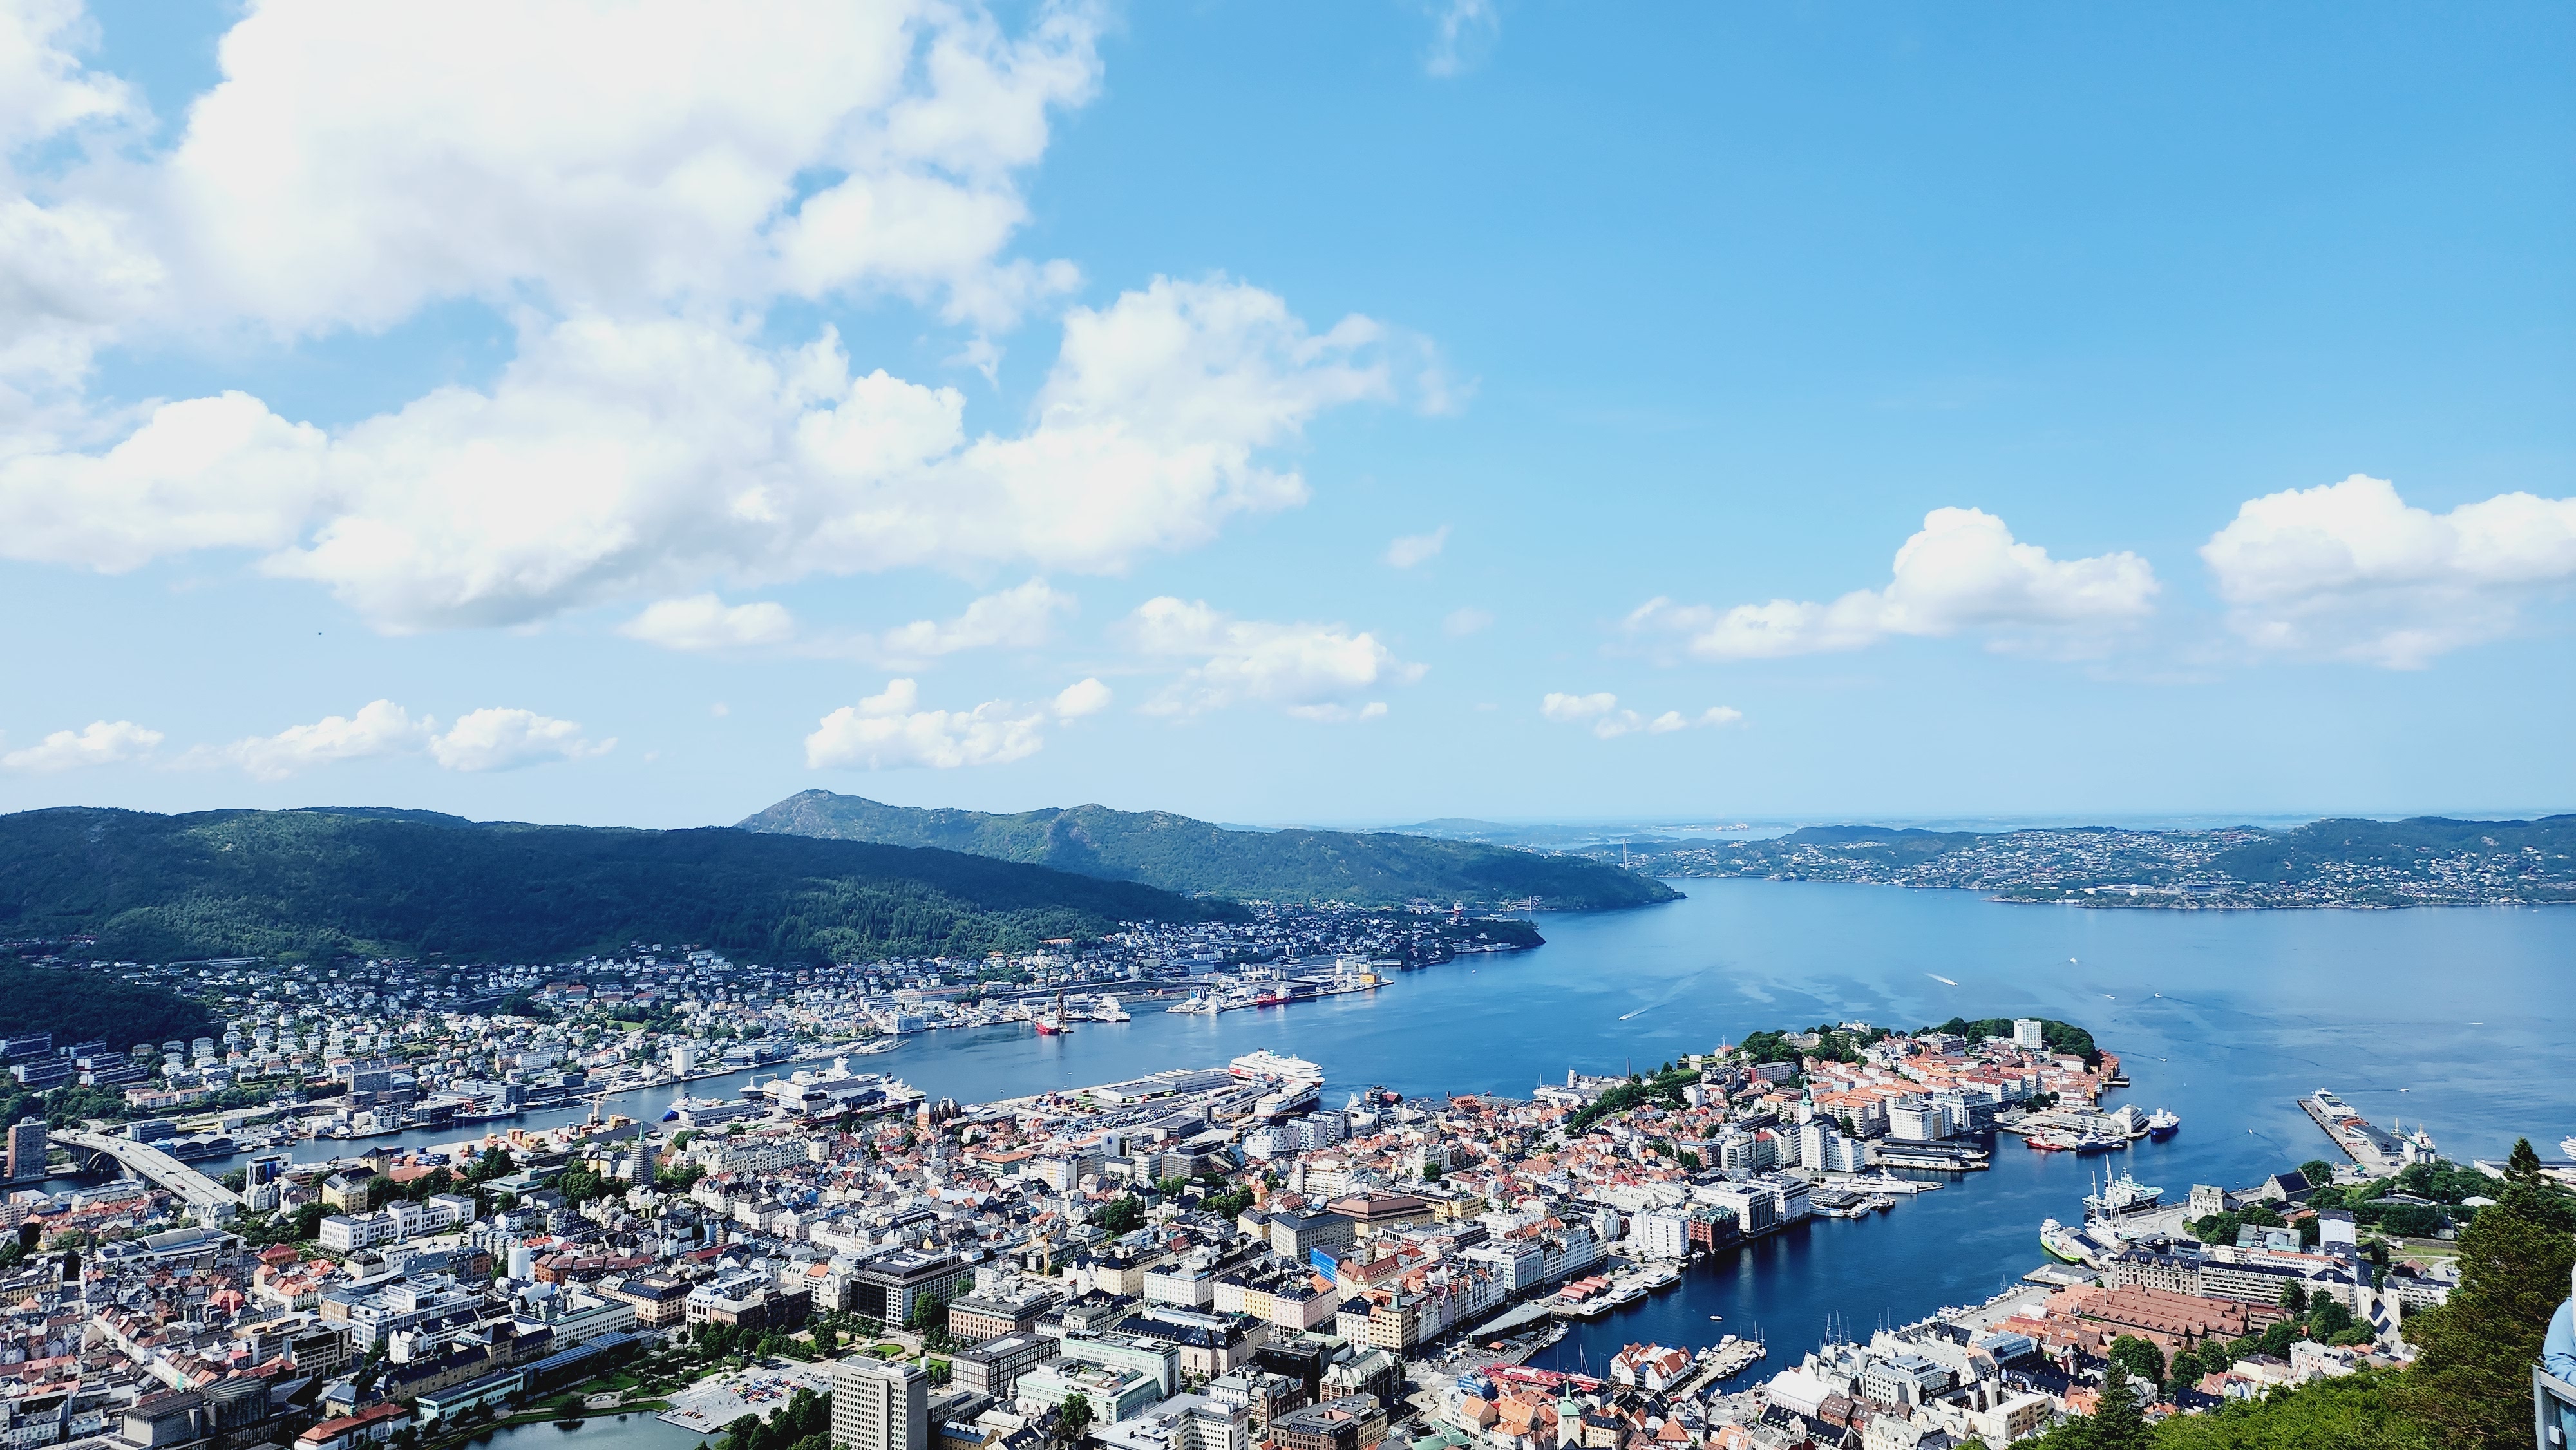 A panoramic view of Bergen, Norway, featuring its colorful buildings and bustling harbor nestled between verdant mountains. The calm blue waters of the fjord reflect the clear sky above, dotted with a few clouds. This scenic cityscape highlights Bergen's picturesque blend of natural beauty and urban charm.